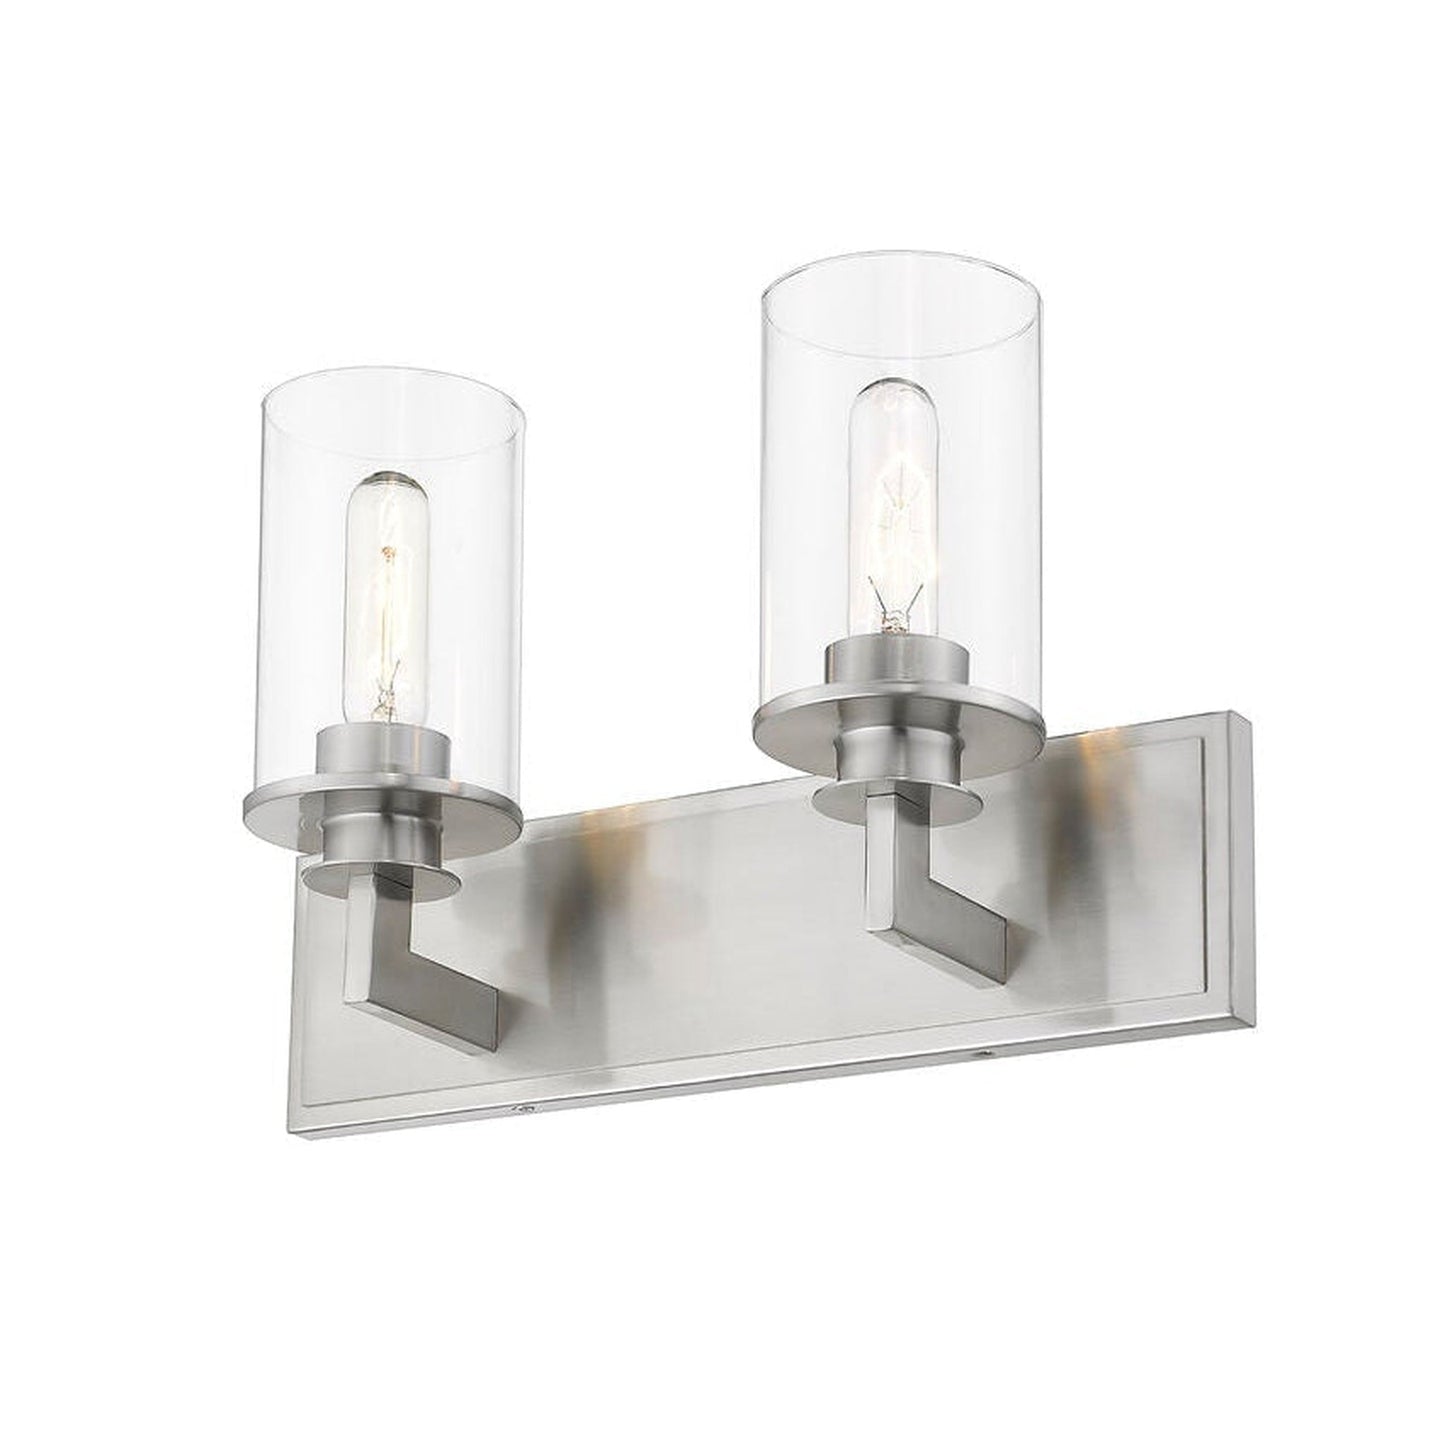 Z-Lite Savannah 16" 2-Light Brushed Nickel Vanity Light With Clear Glass Shade